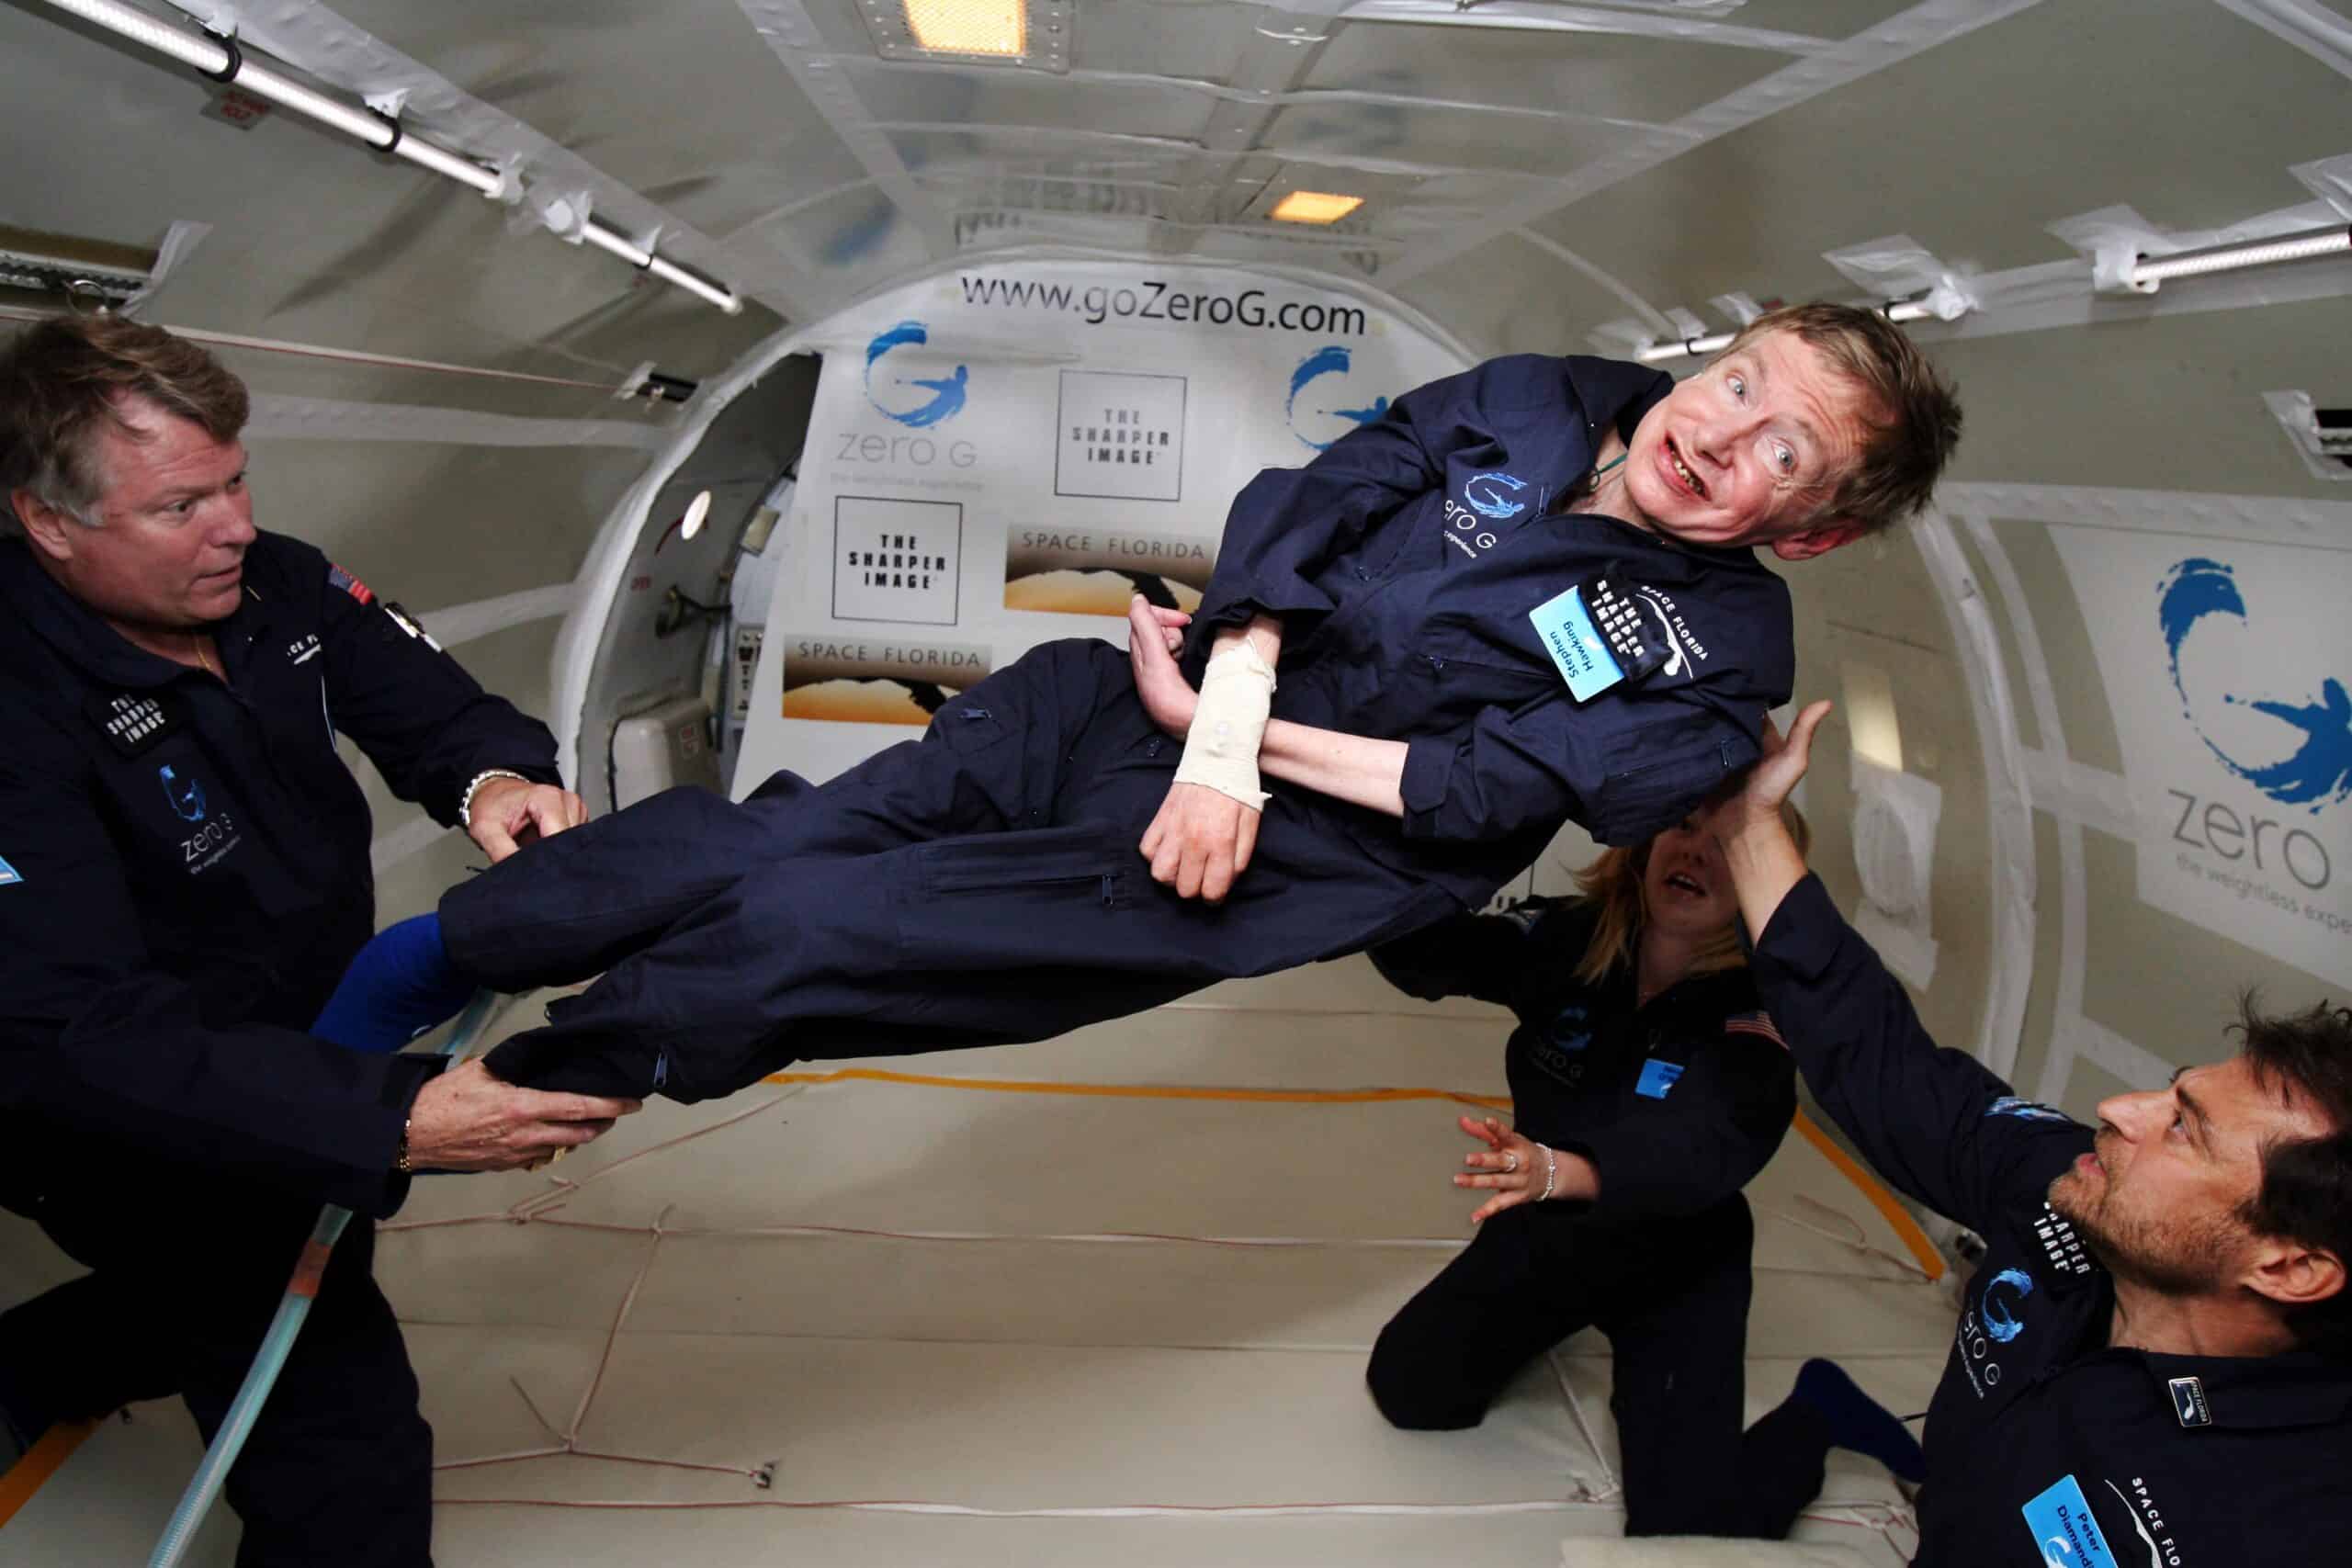 Stephen Hawking experiences weightlessness as he floats inside a 727 that allow passengers to experience brief periods of reduced gravity. Was Stephen Hawking IQ the highest IQ ever?